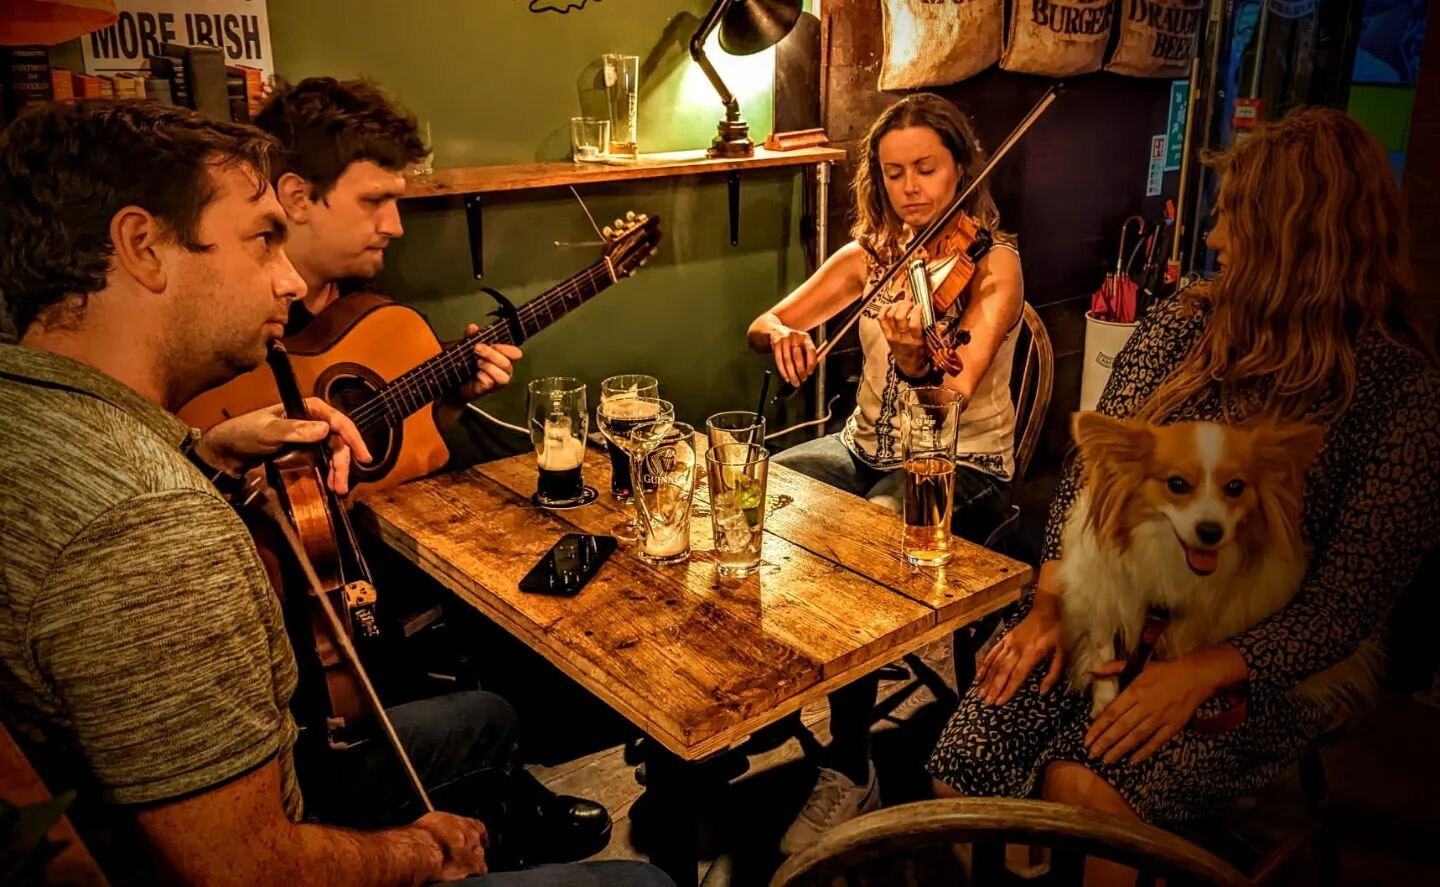 What better way to end the week than with our traditional Irish seisi&uacute;n -  every Sunday from 5.30pm!

Slaint&eacute; ☘️